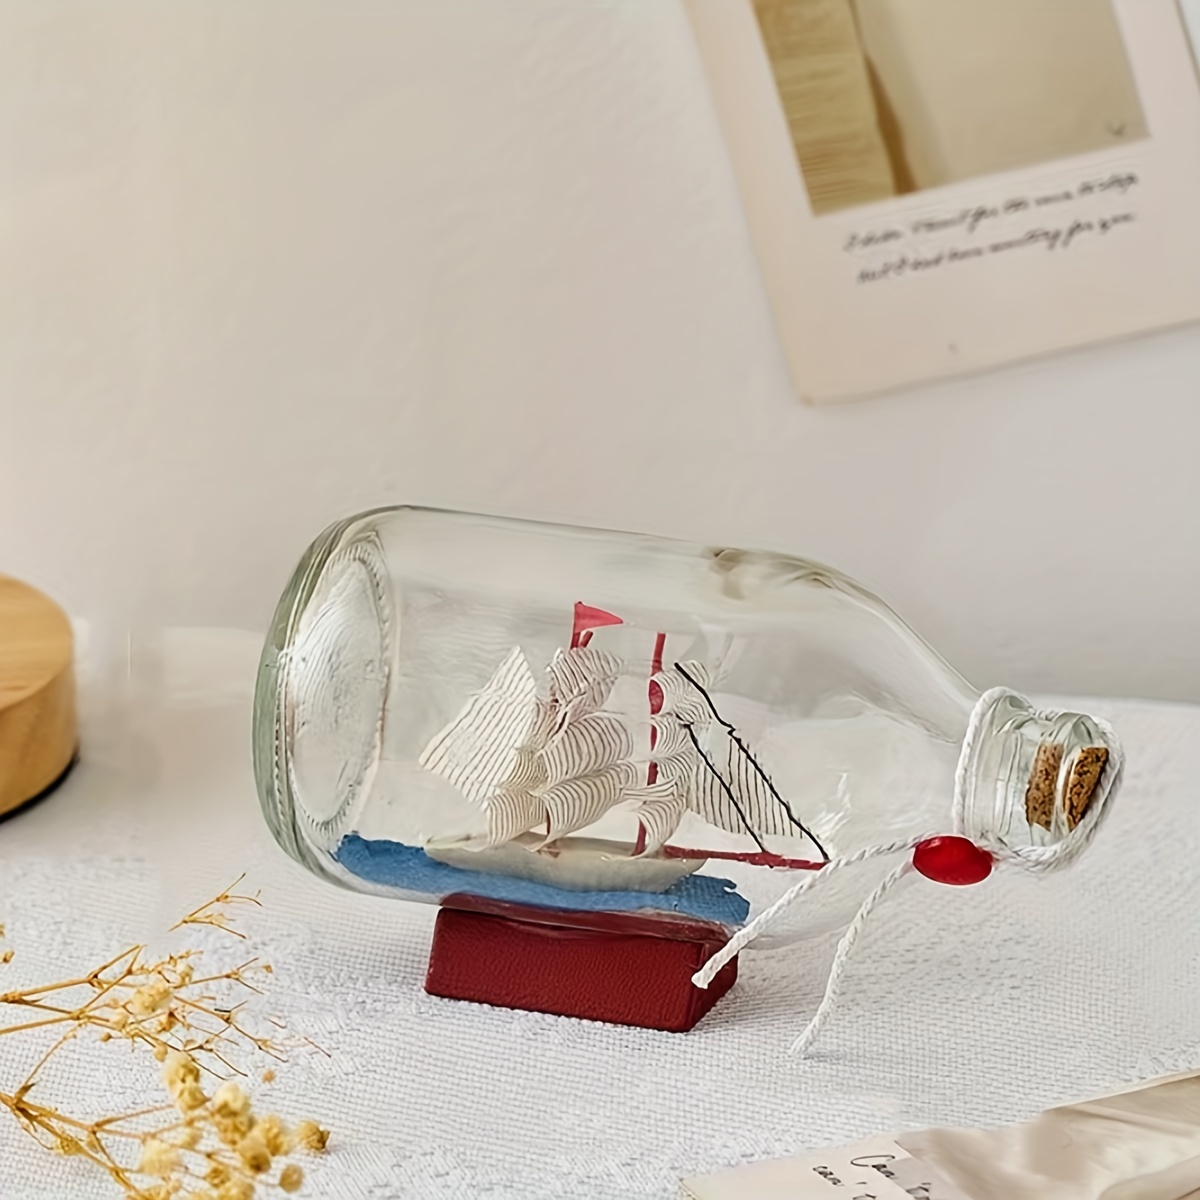  LAMF Drift Bottle Decor, Sailing Boat in Wishing Bottle Glass  Cork Bottles, Pirate Ship in a Bottle Kit Handicraft Nautical Home  Decorations Gifts Crafts, Medium, (57920A42047PFZP) : Home & Kitchen